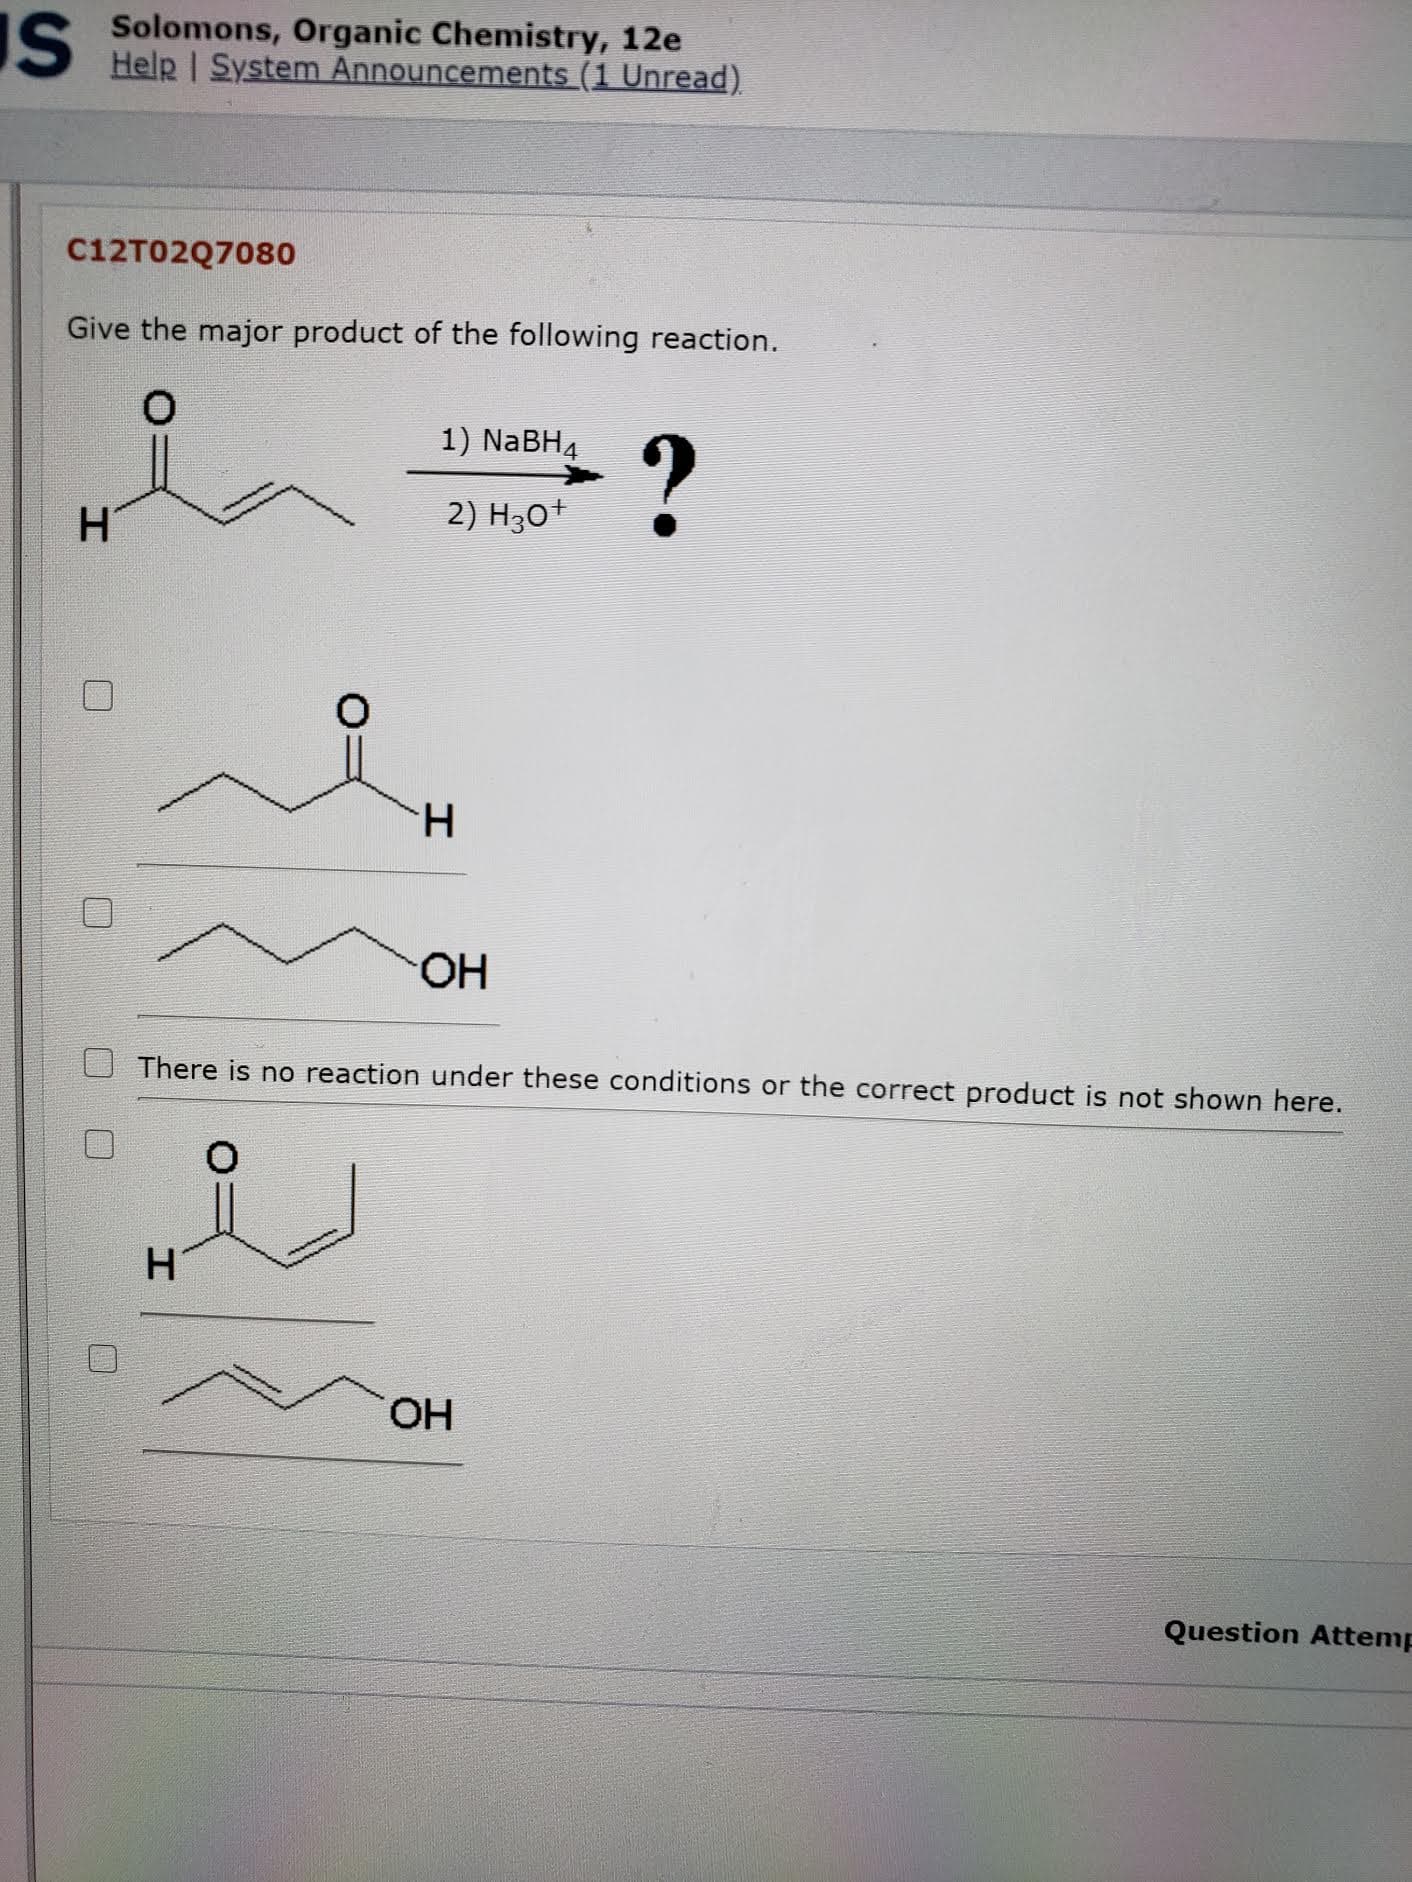 C12T02Q7080
Give the major product of the following reaction.
1) NaBH4
2) H30+
H.
HO.
There is no reaction under these conditions or the correct product is not shown here.
HO.
